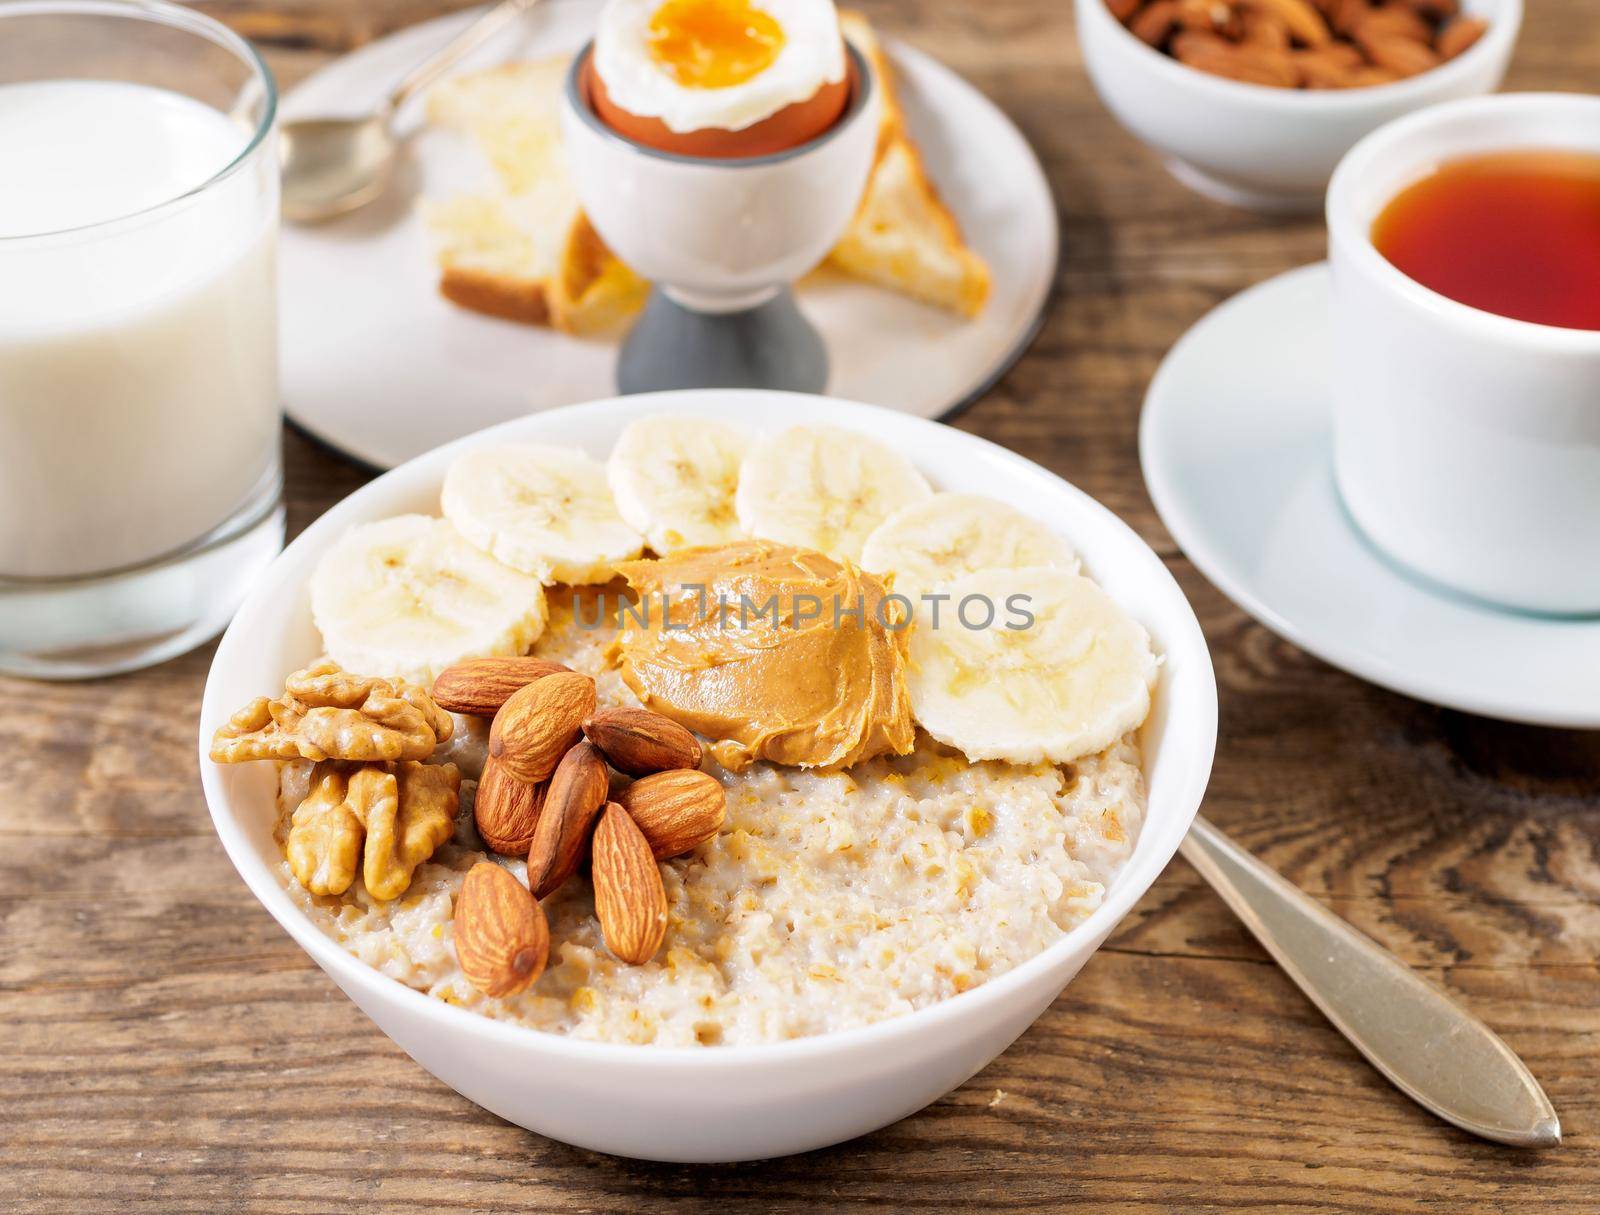 healthy breakfast - oatmeal with nuts, soft boiled eggs, selective focus, side view, close up by NataBene